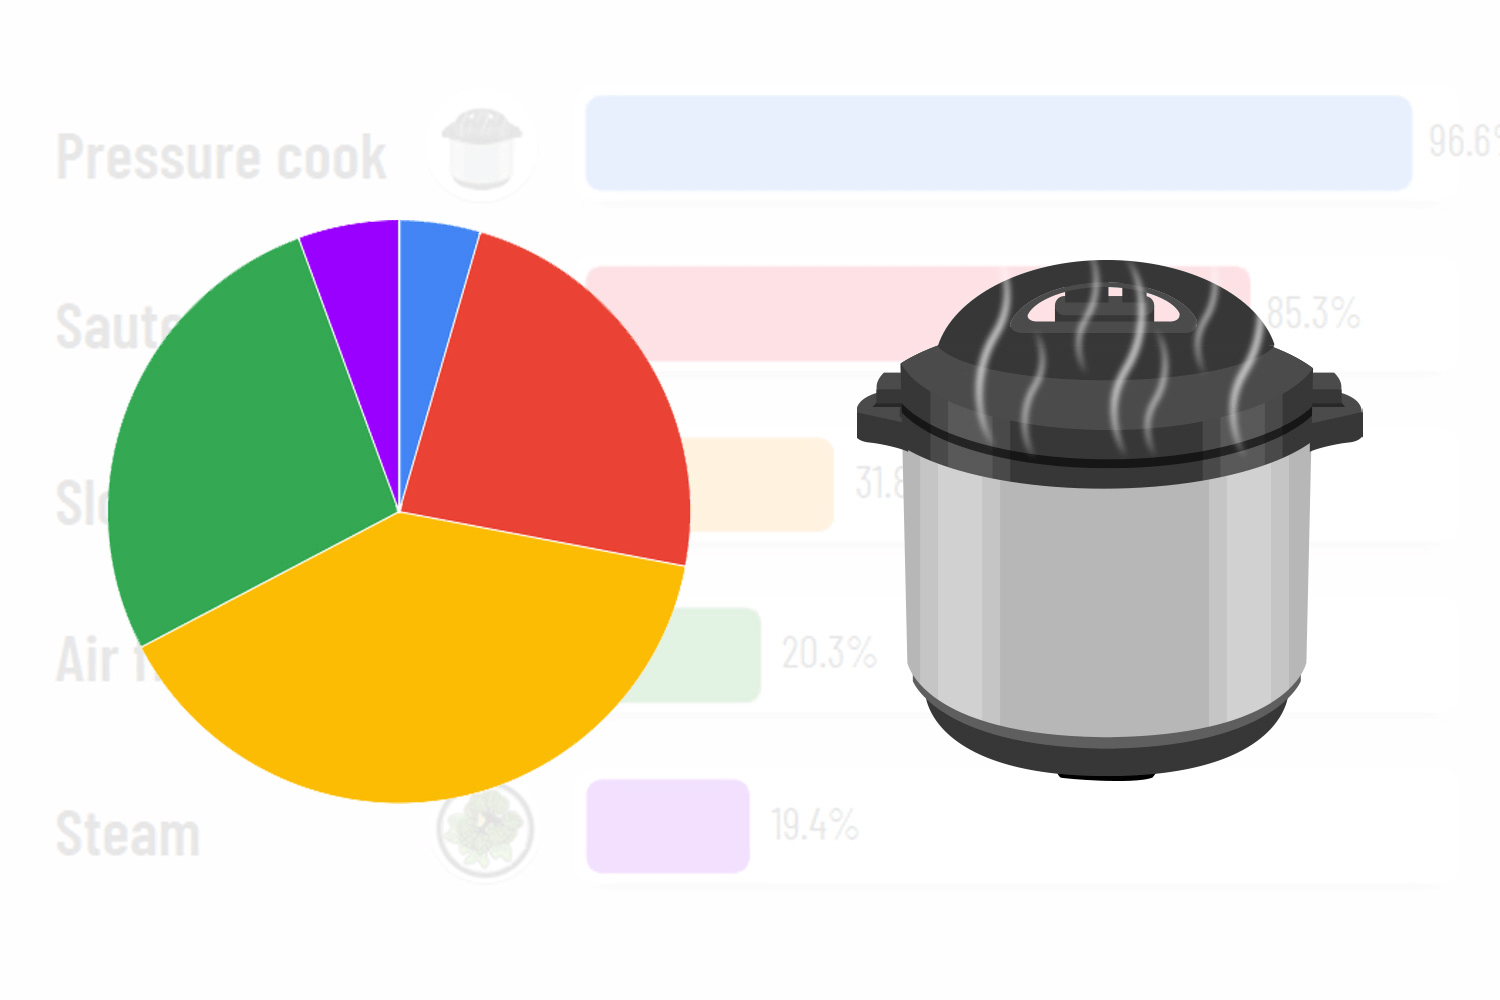 Instant Pot drawing alongside a colorful pie chart